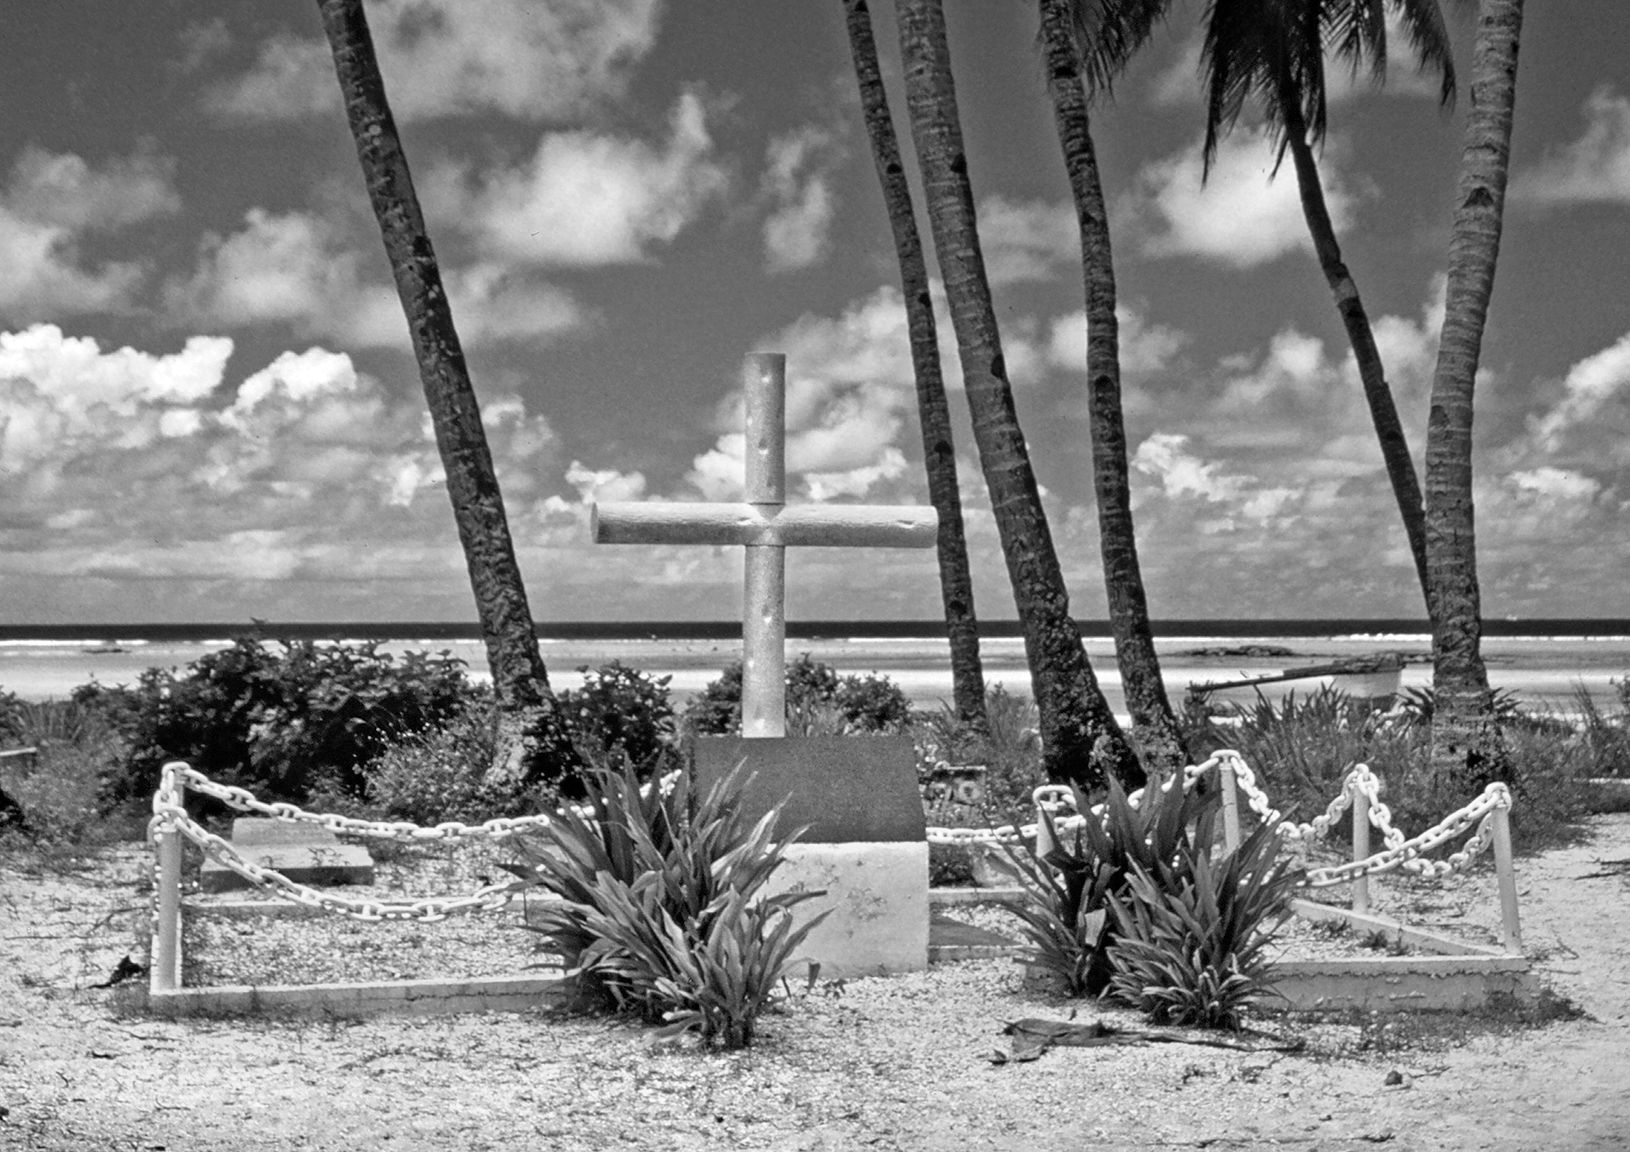 In 1943, U.S. Marines erected a makeshift cross of coconut logs as a memorial for the 22 victims of the Japanese executions of Allied prisoners on Betio. A permanent concrete memorial, shown here, was later constructed.